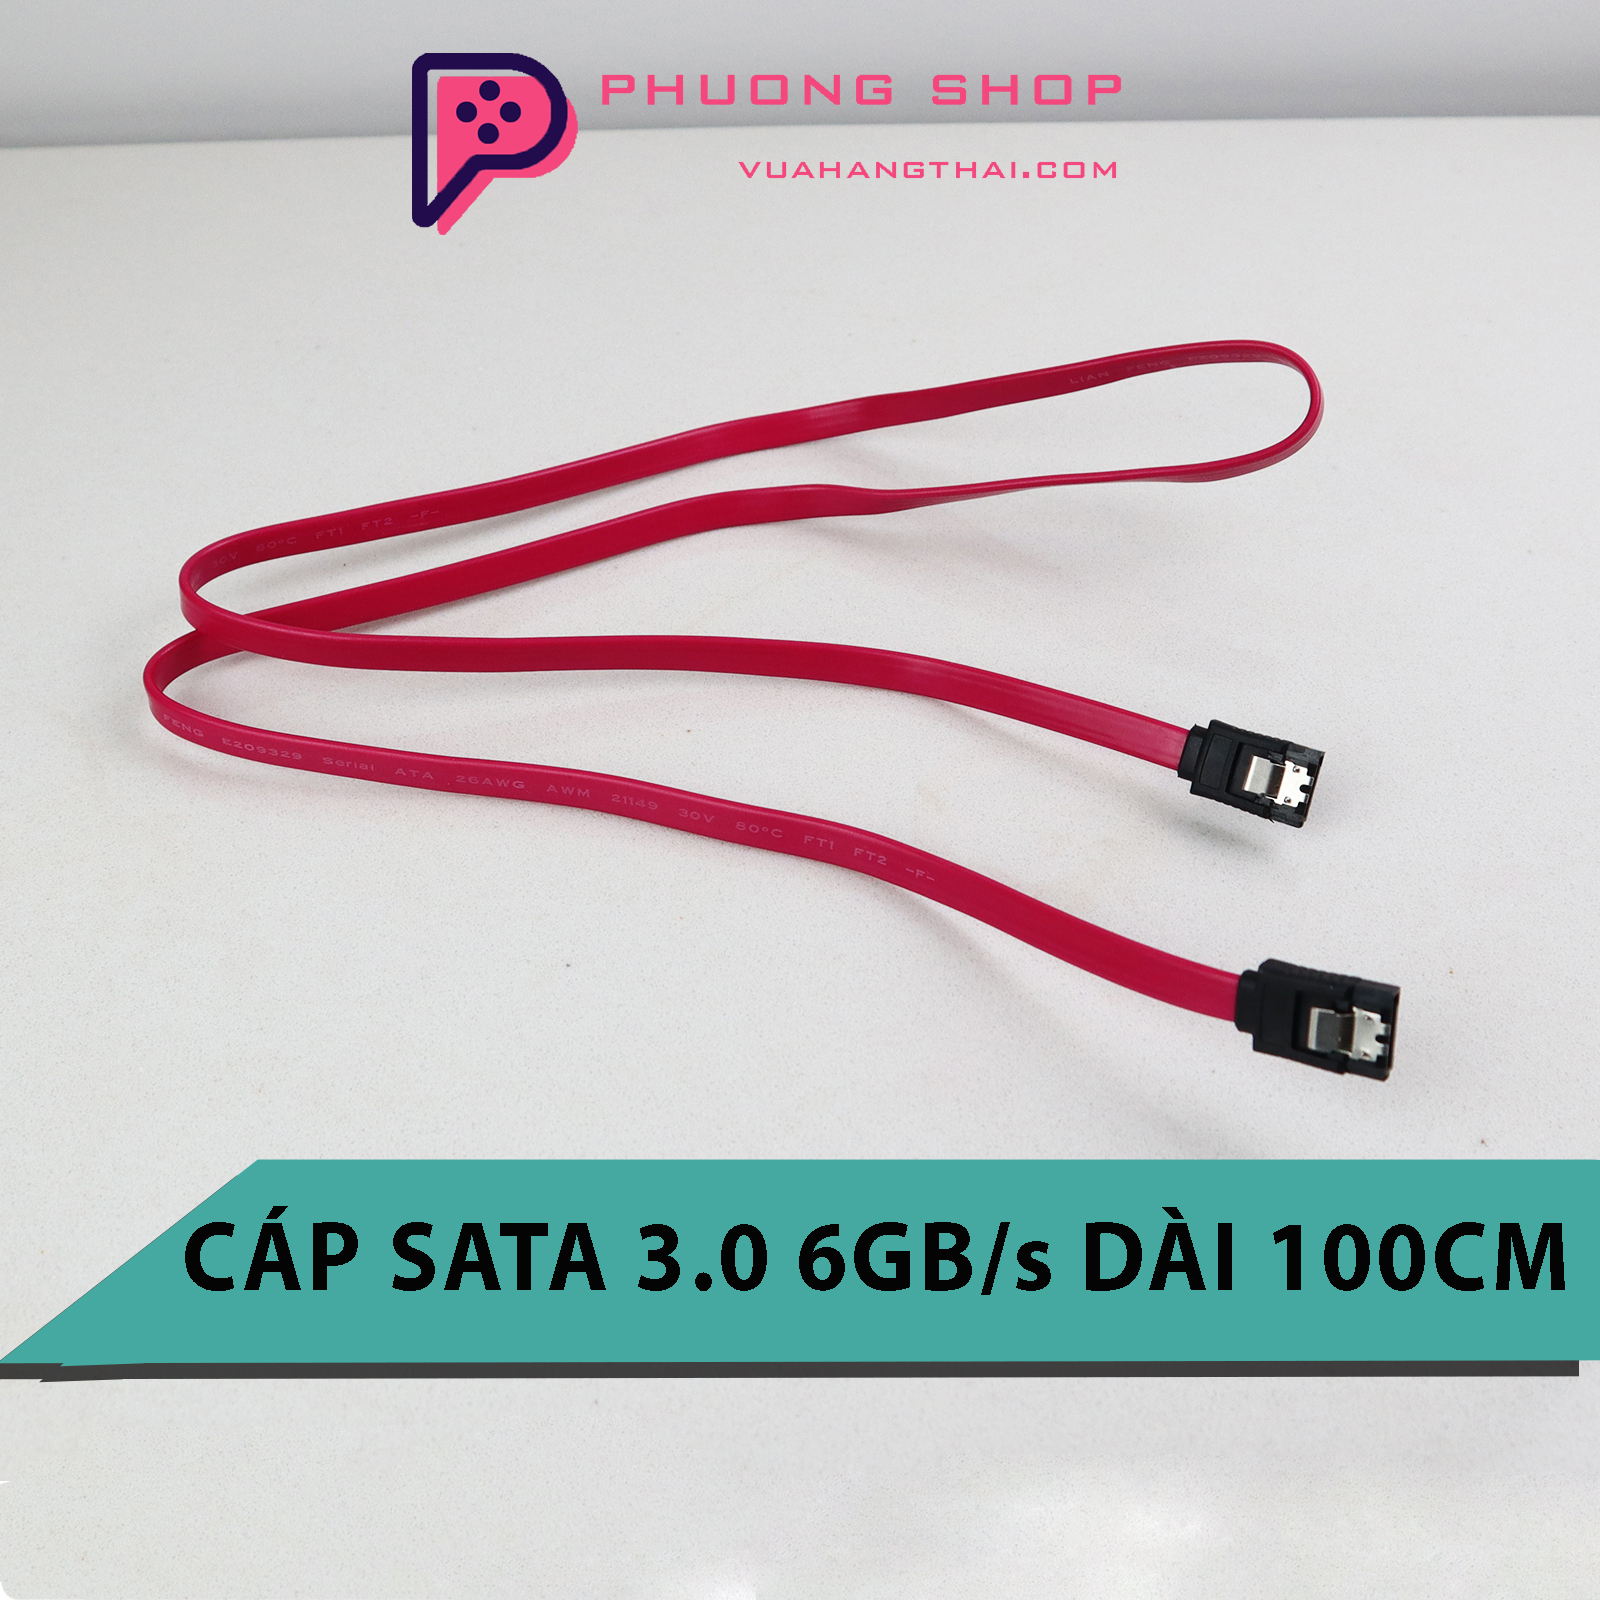 cable SATA 3.0 High Speed 6 Gb s long 100cm, SATA cable 1m